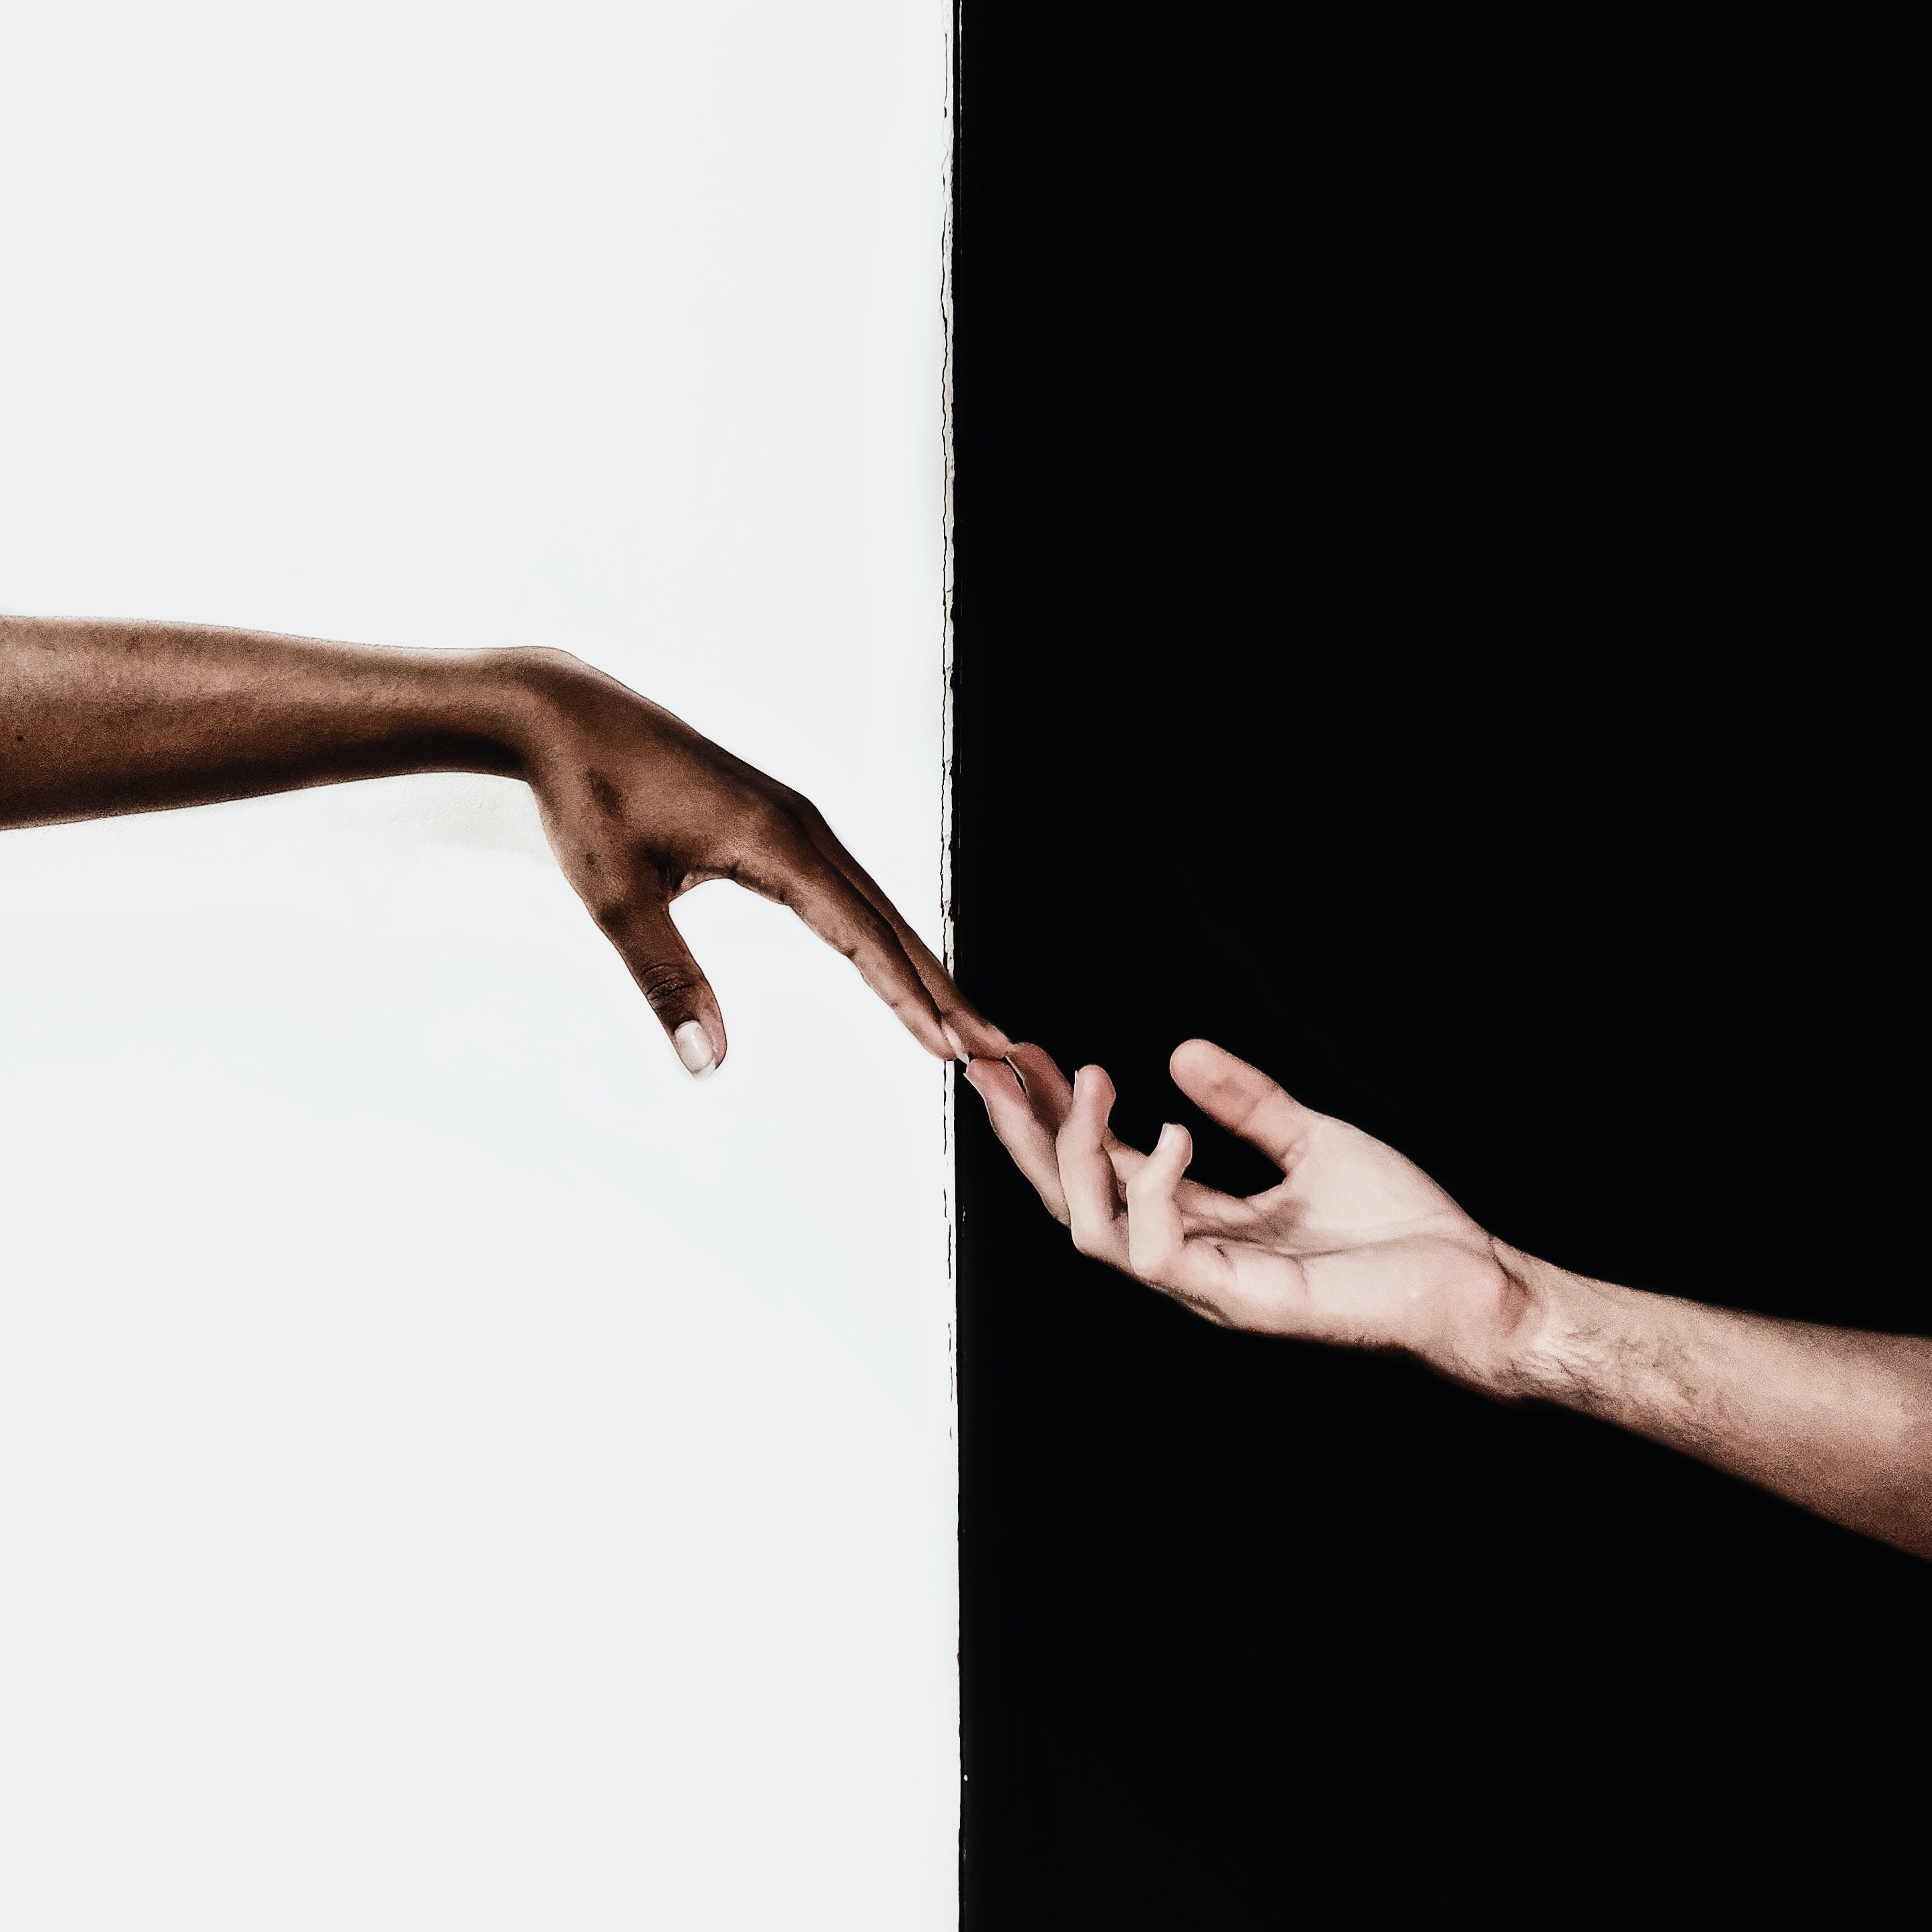 feminine hand meets masculine hand on black and white background